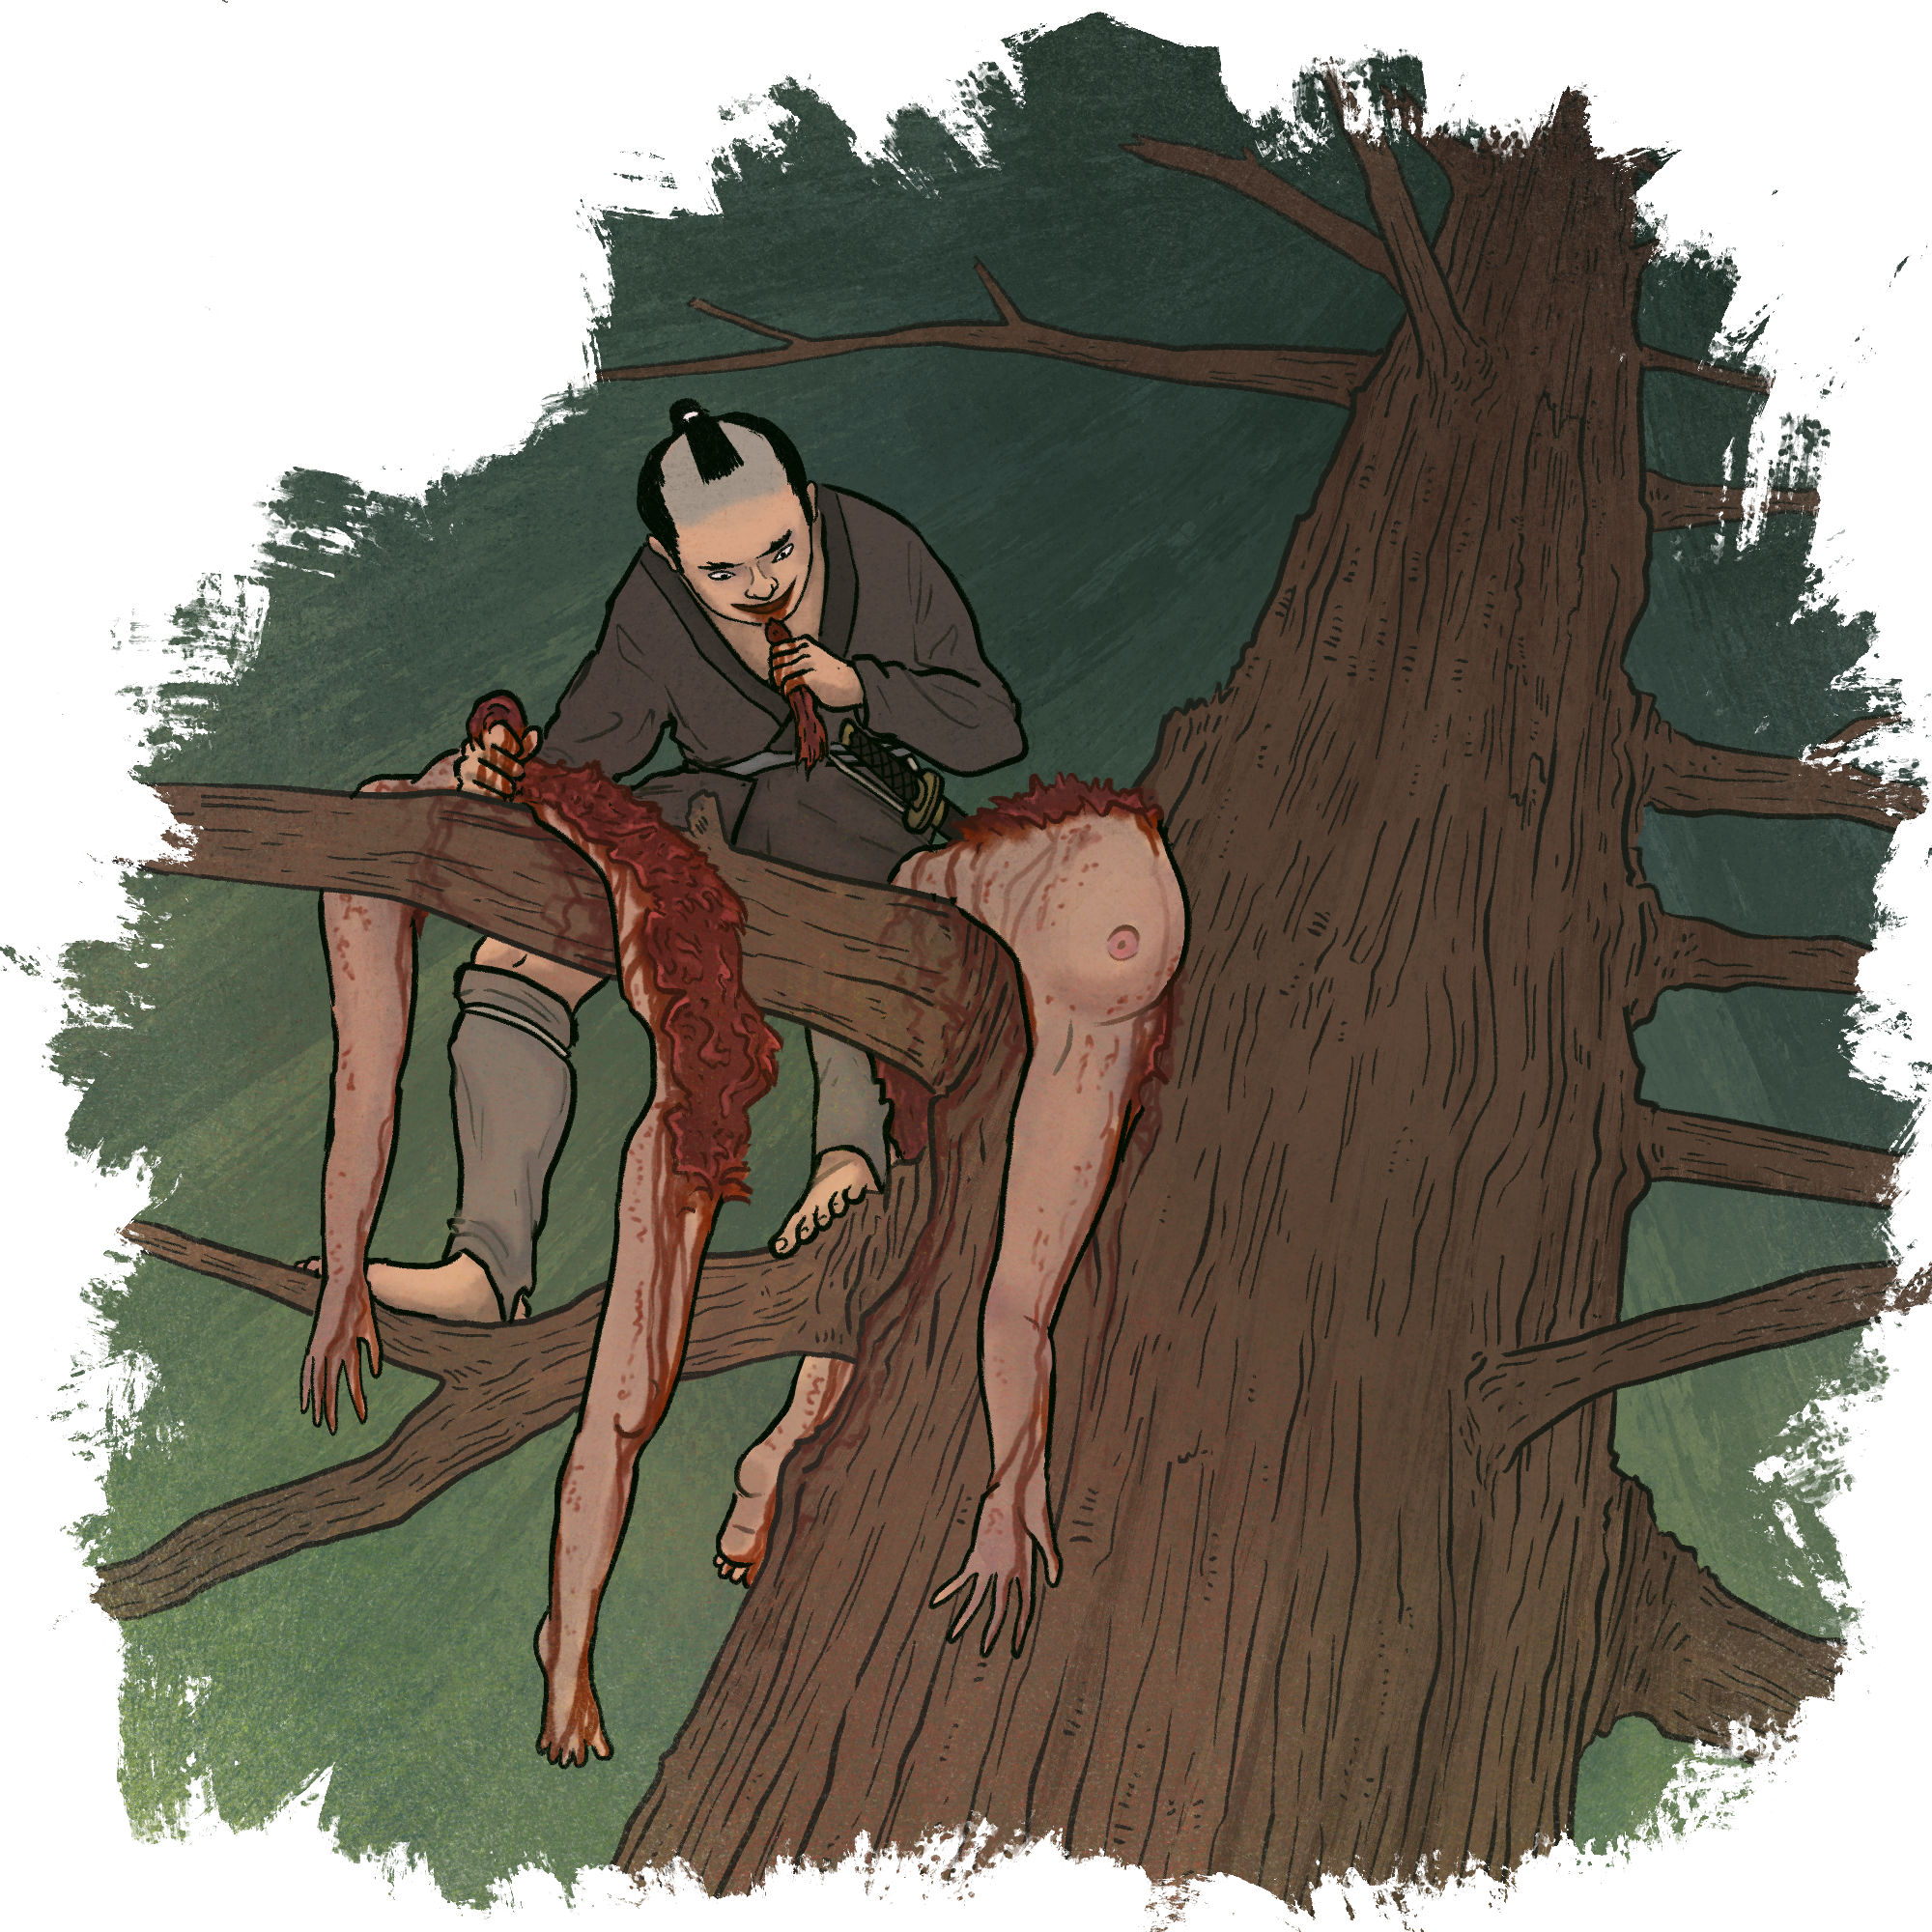 A man in a tree eats pieces of a woman's corpse ripped in two.